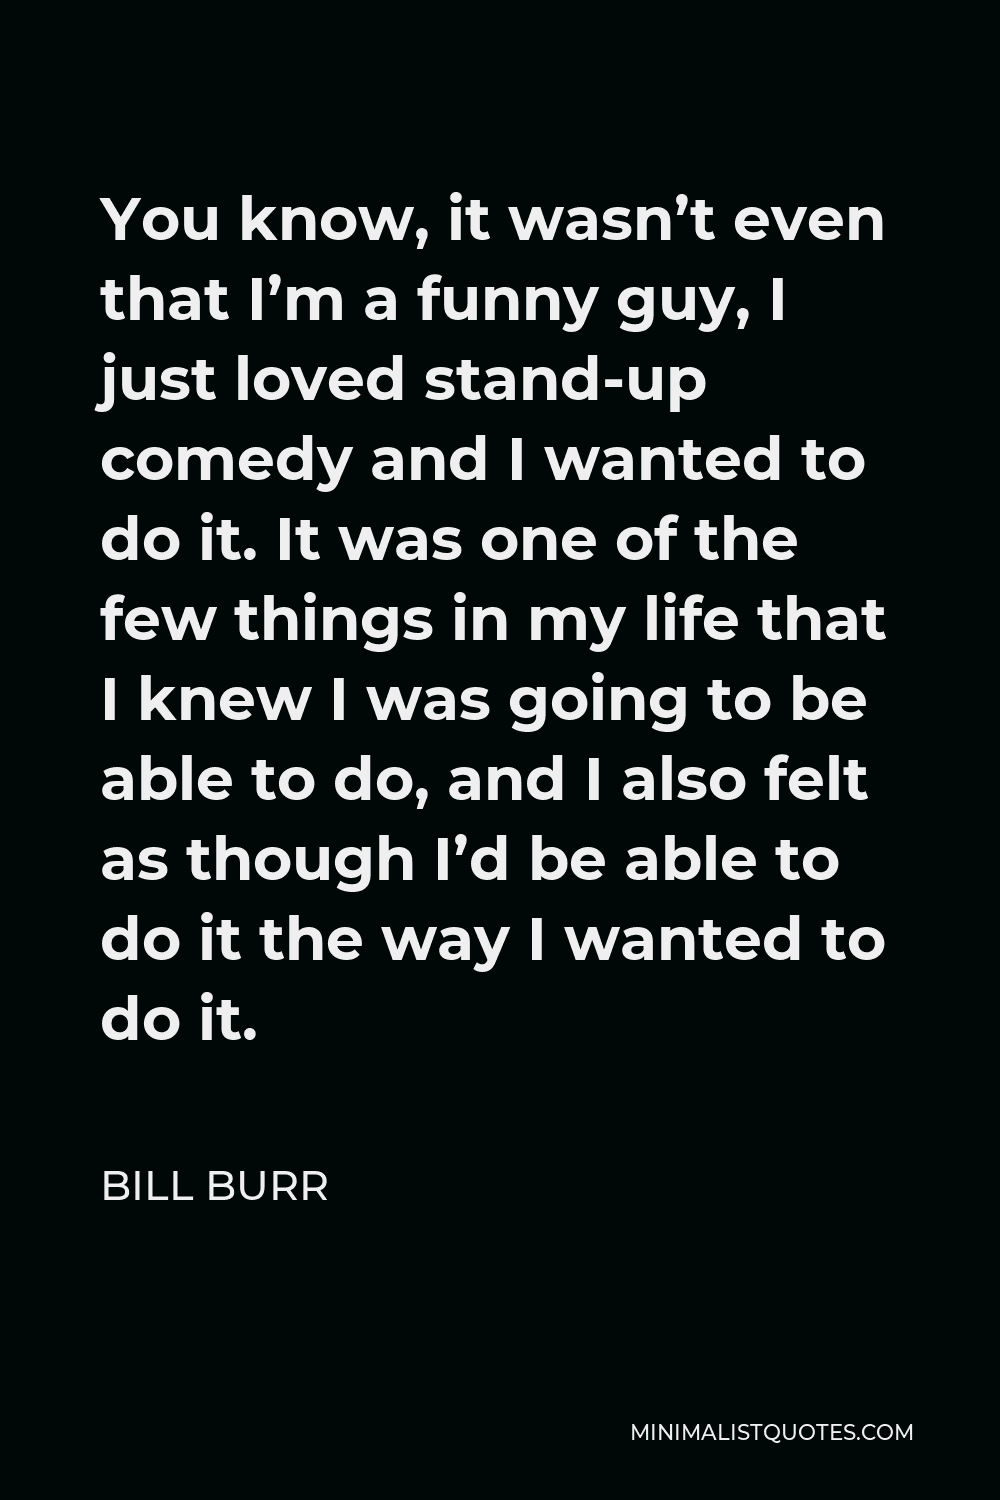 Bill Burr Quote - You know, it wasn’t even that I’m a funny guy, I just loved stand-up comedy and I wanted to do it. It was one of the few things in my life that I knew I was going to be able to do, and I also felt as though I’d be able to do it the way I wanted to do it.